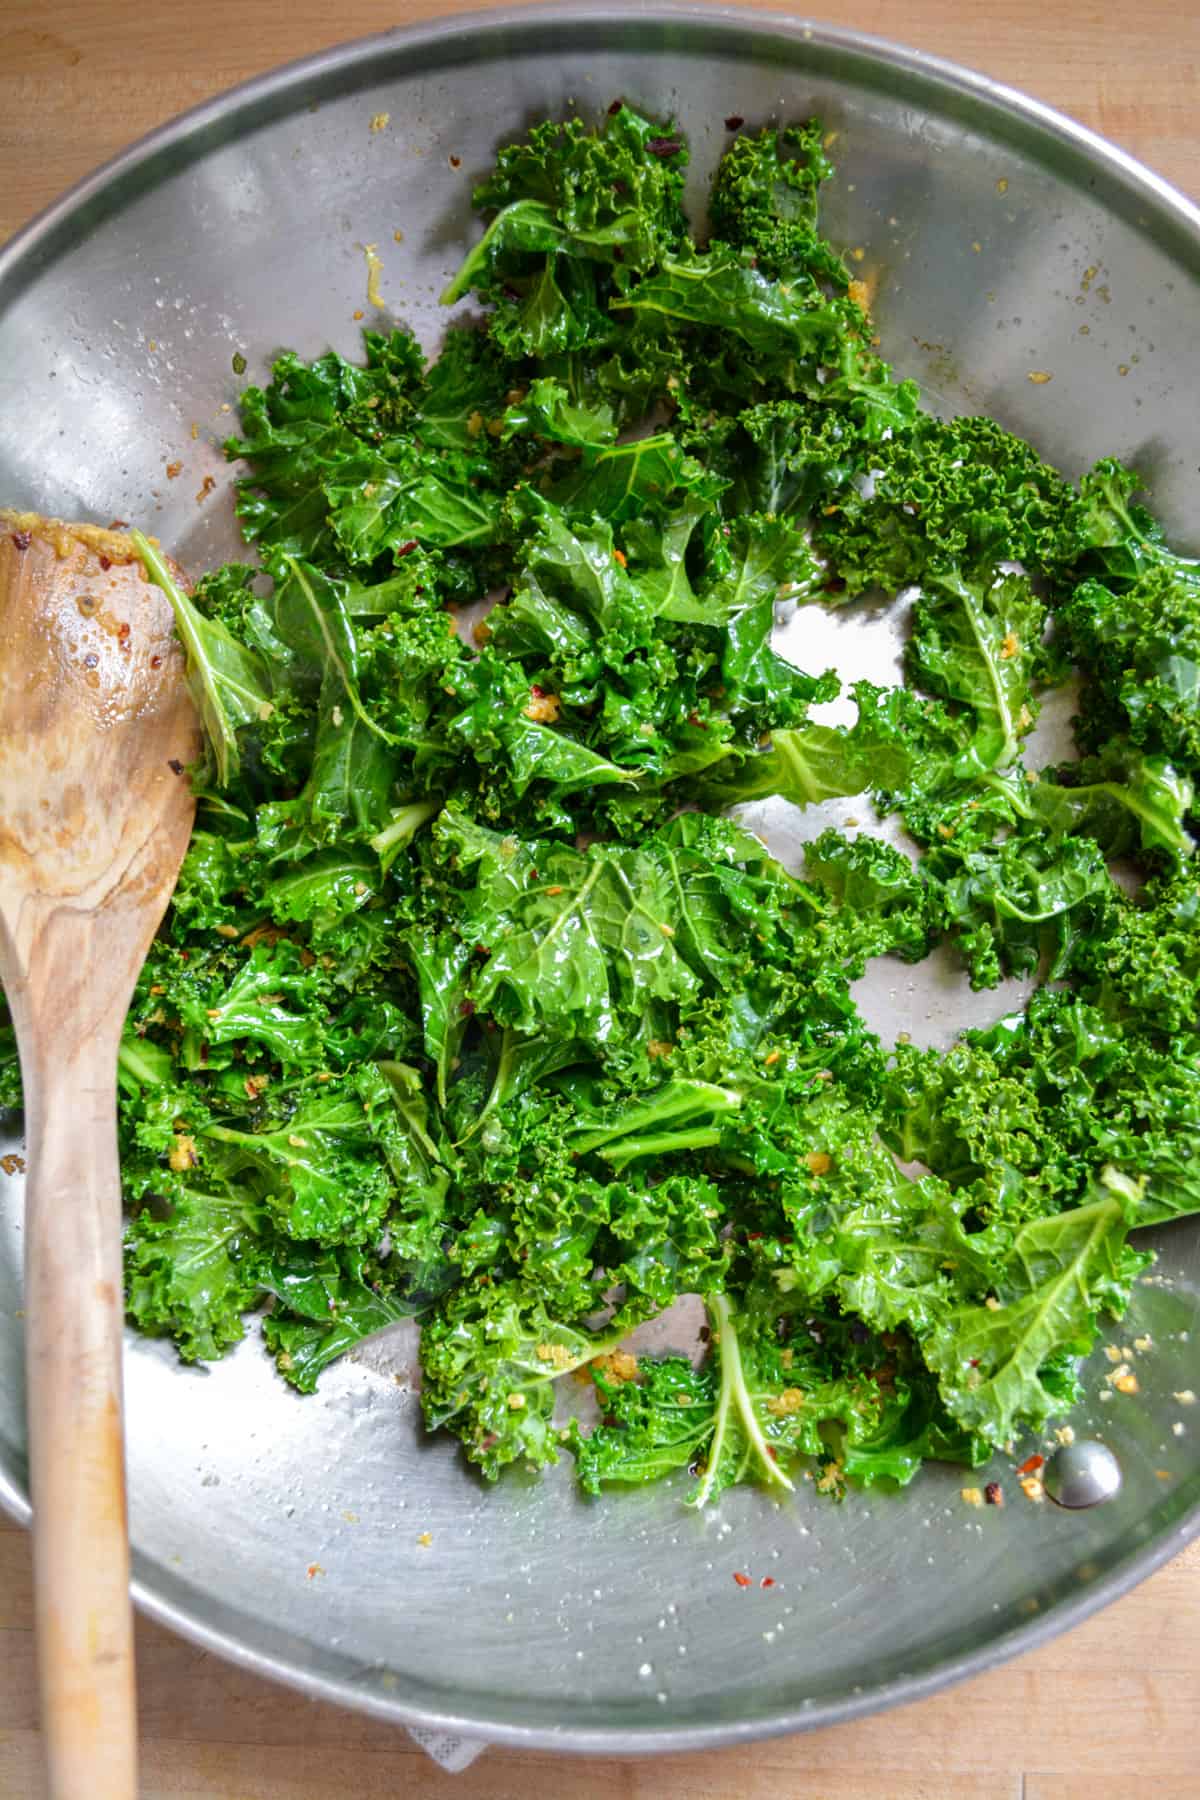 Wilted kale in a stainless sleet skillet with a wooden spoon off to the left.